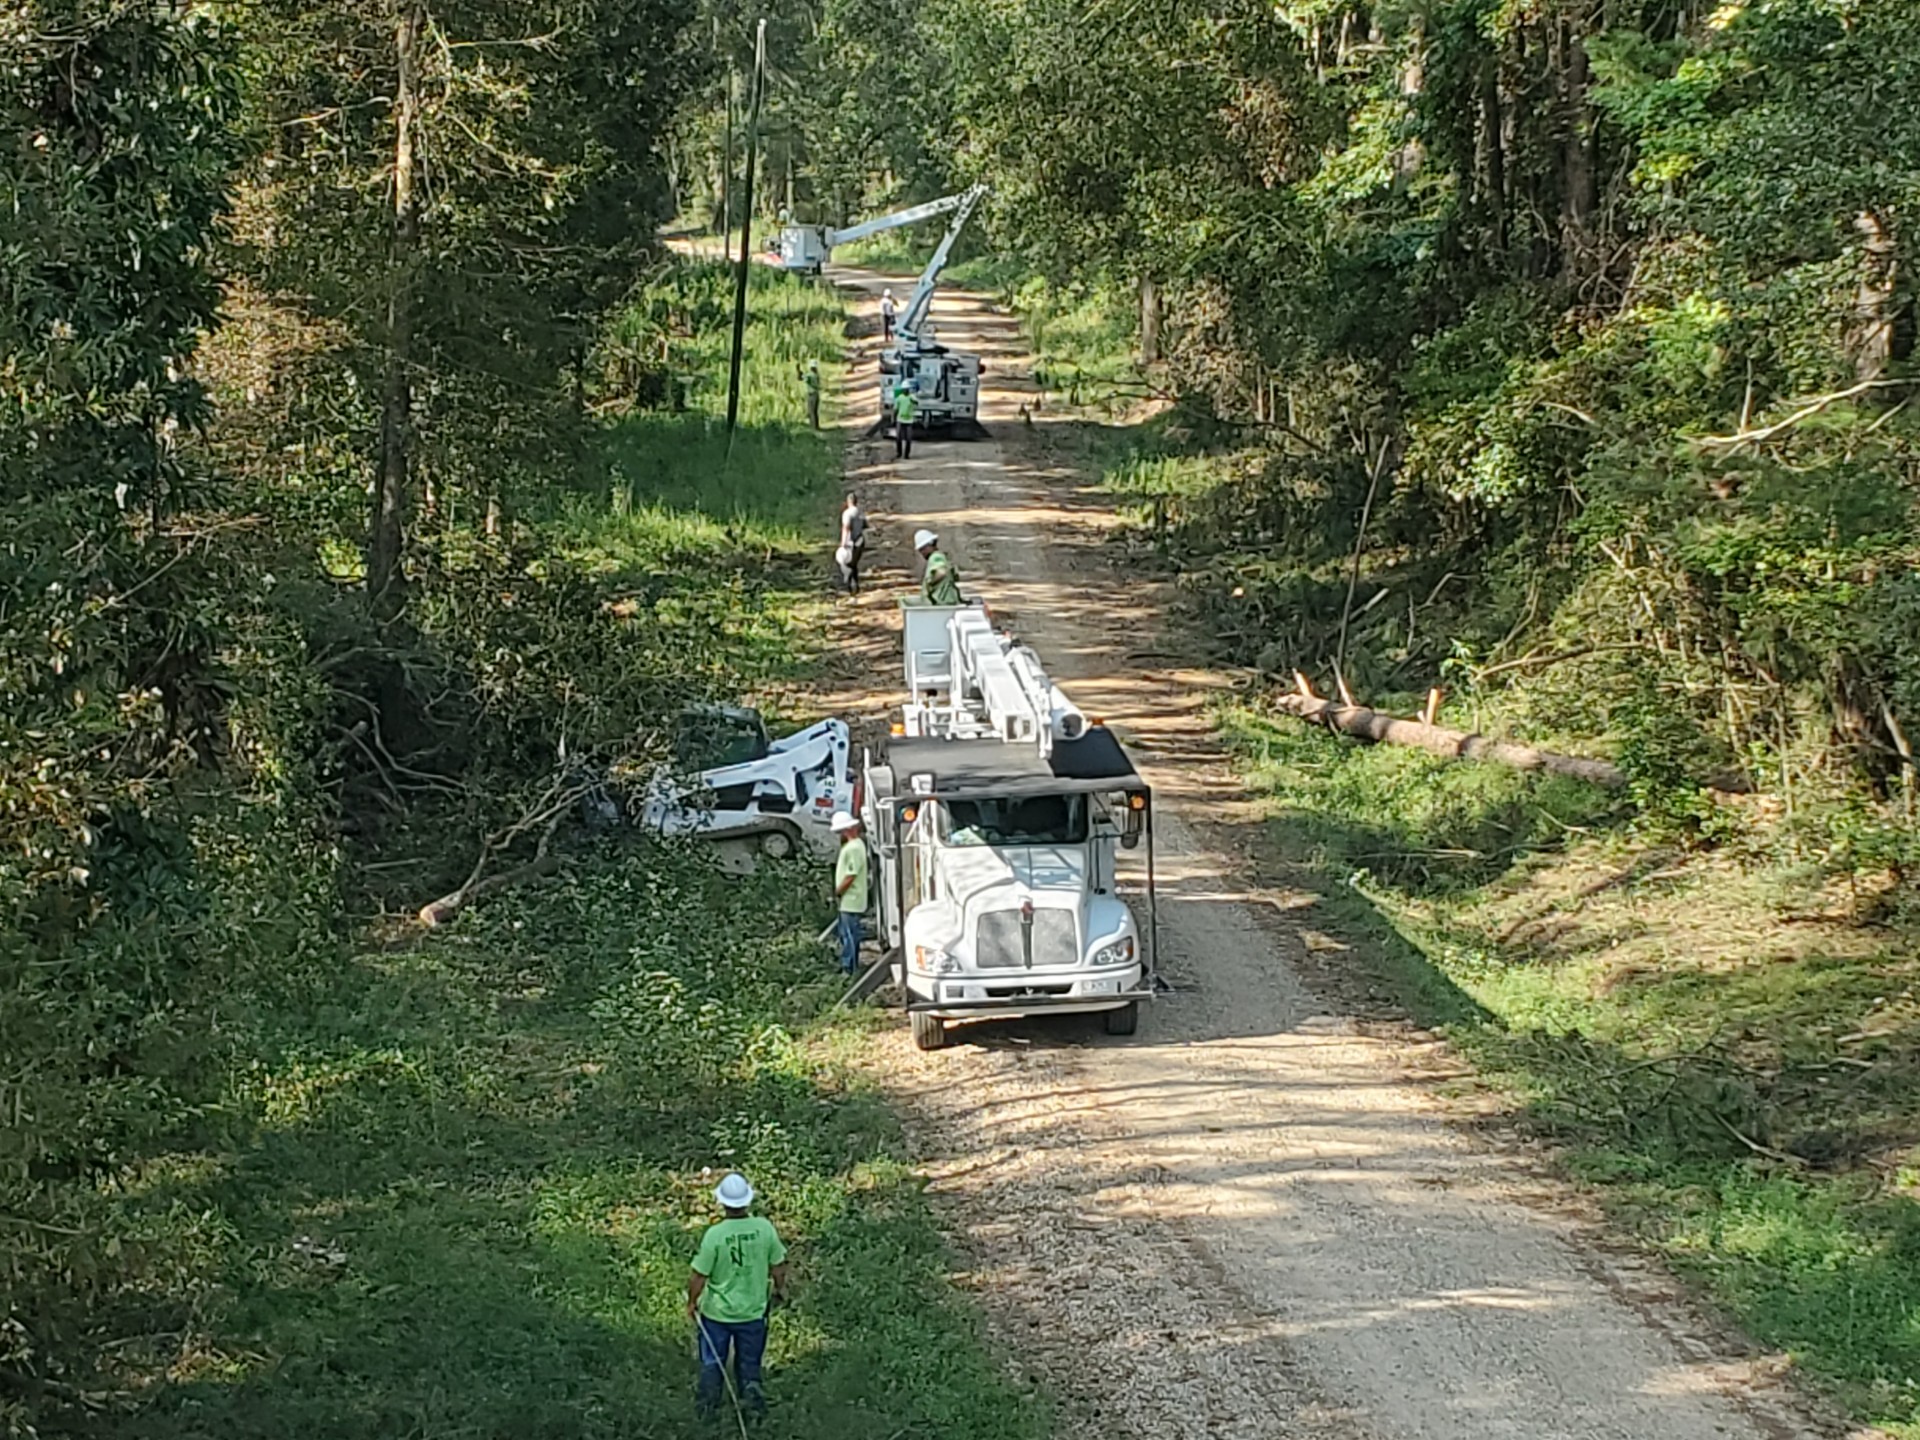 update-boone-electric-sends-second-crew-to-hurricane-damaged-louisiana